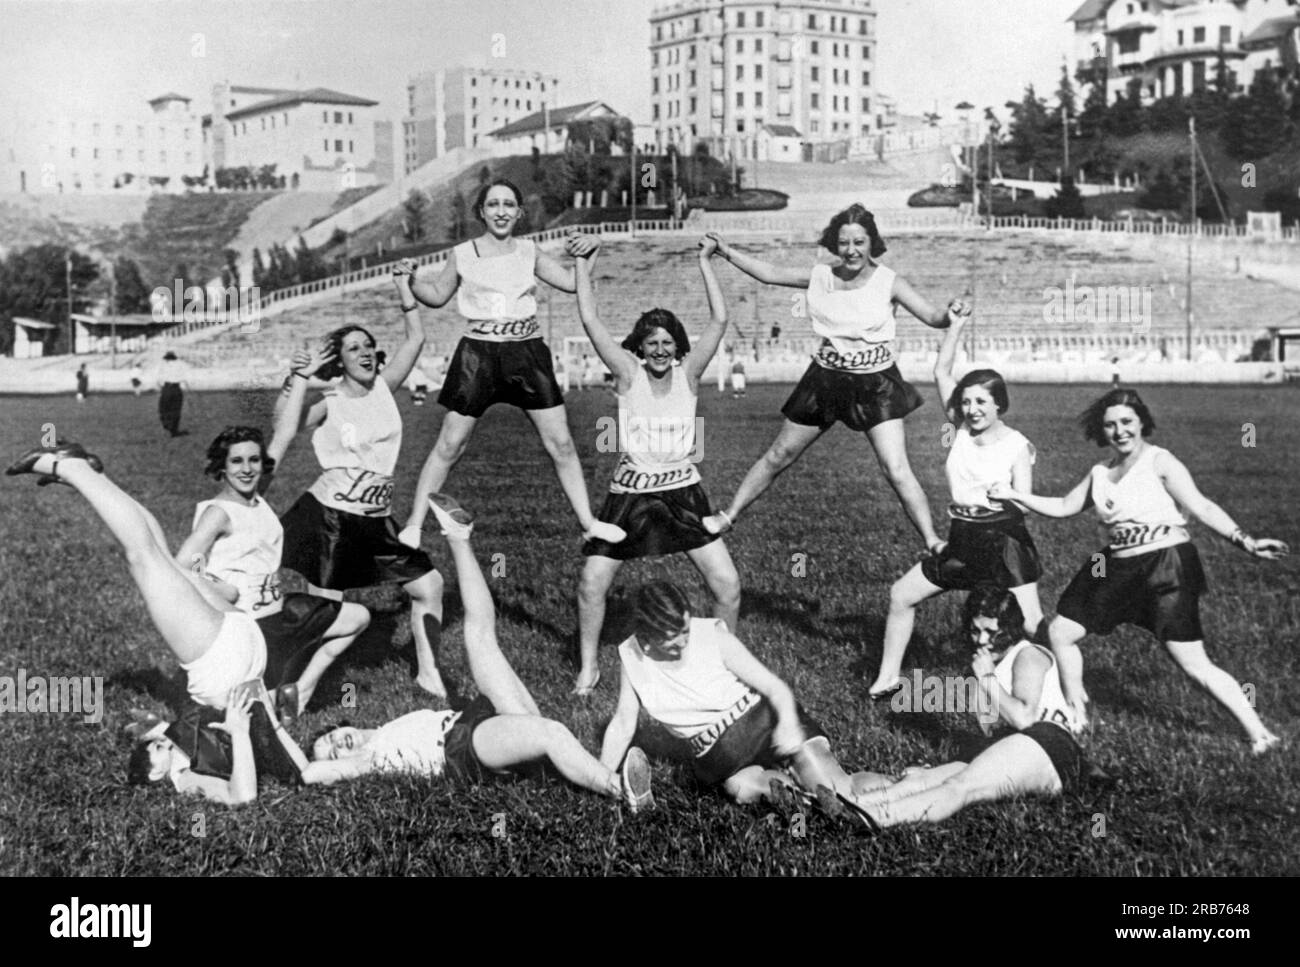 Madrid, Spain:  c. 1926. Girls from the Romea Theater doing a variety of exercises on the soccer field during the halftime of their game with the Metropolitano Theater girls. Stock Photo